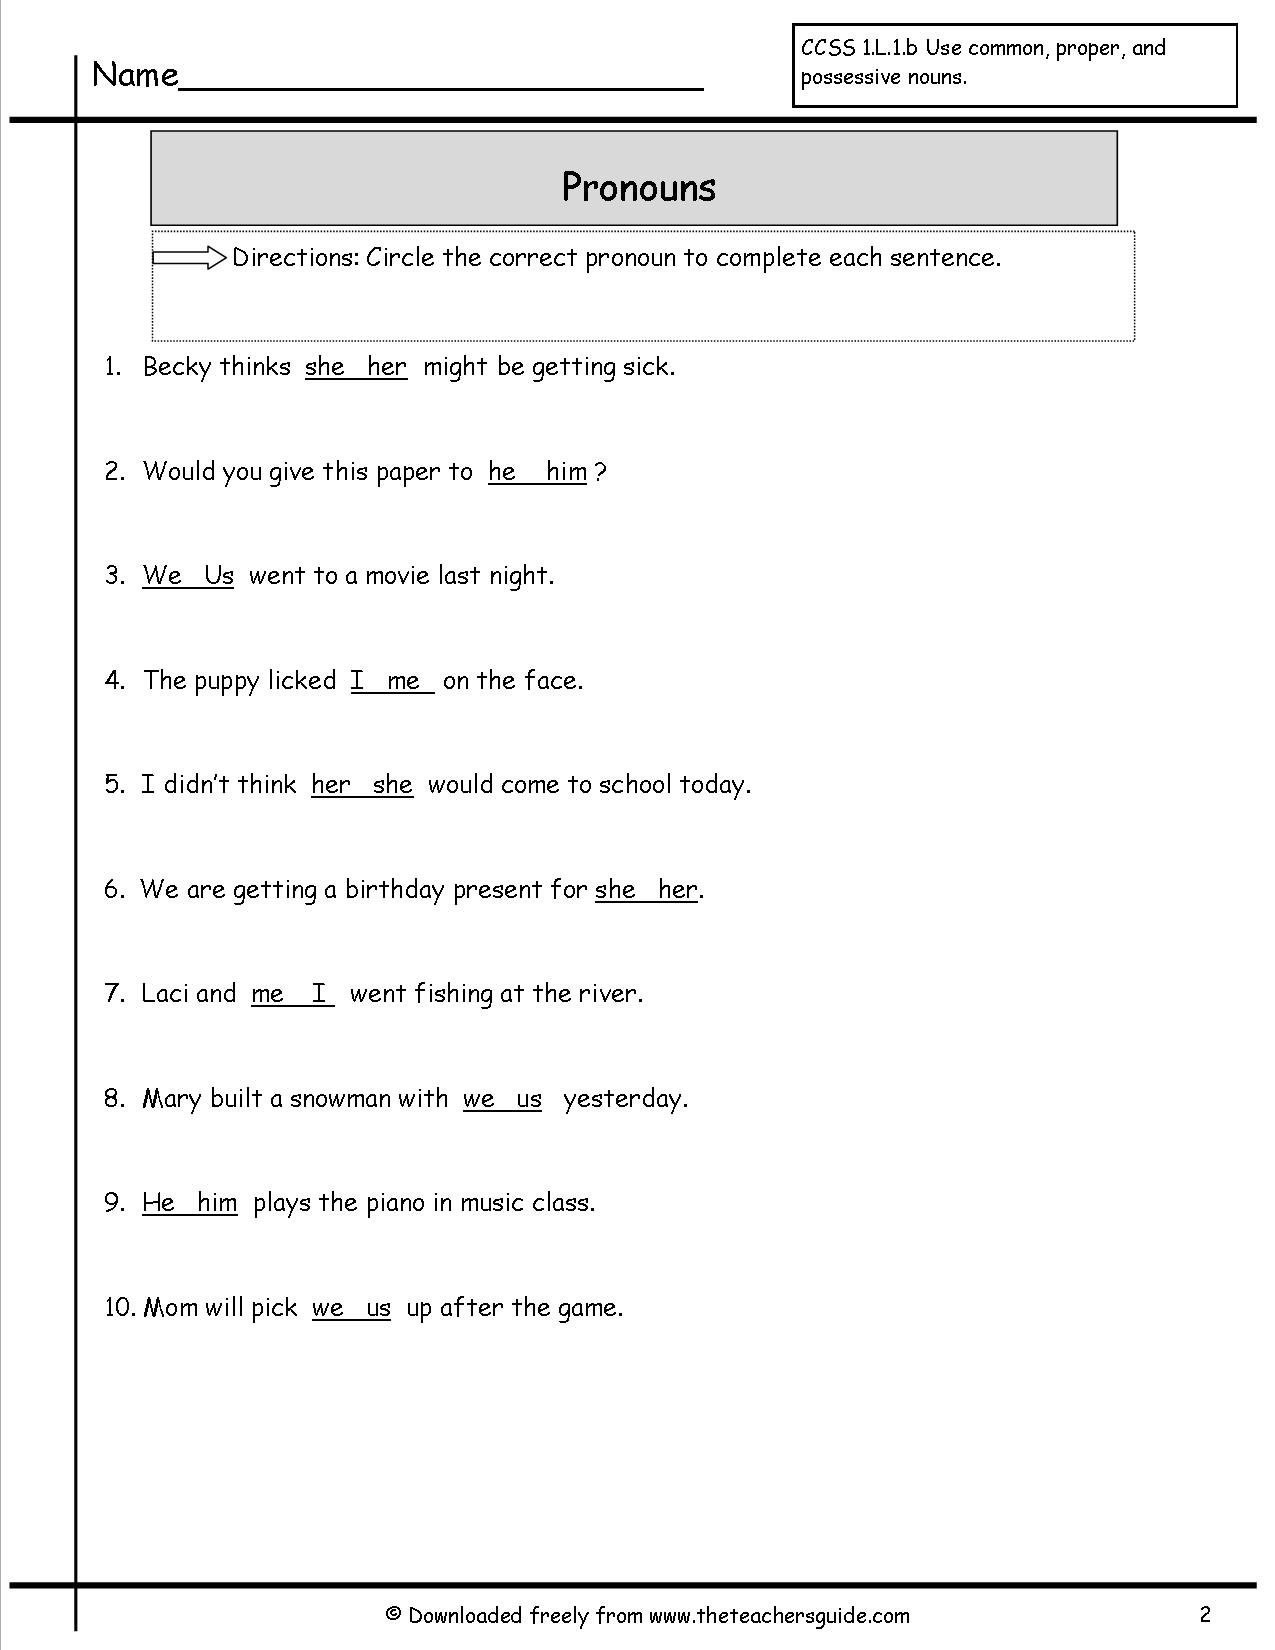 15-best-images-of-pronouns-worksheets-with-answers-subject-pronouns-worksheets-demonstrative